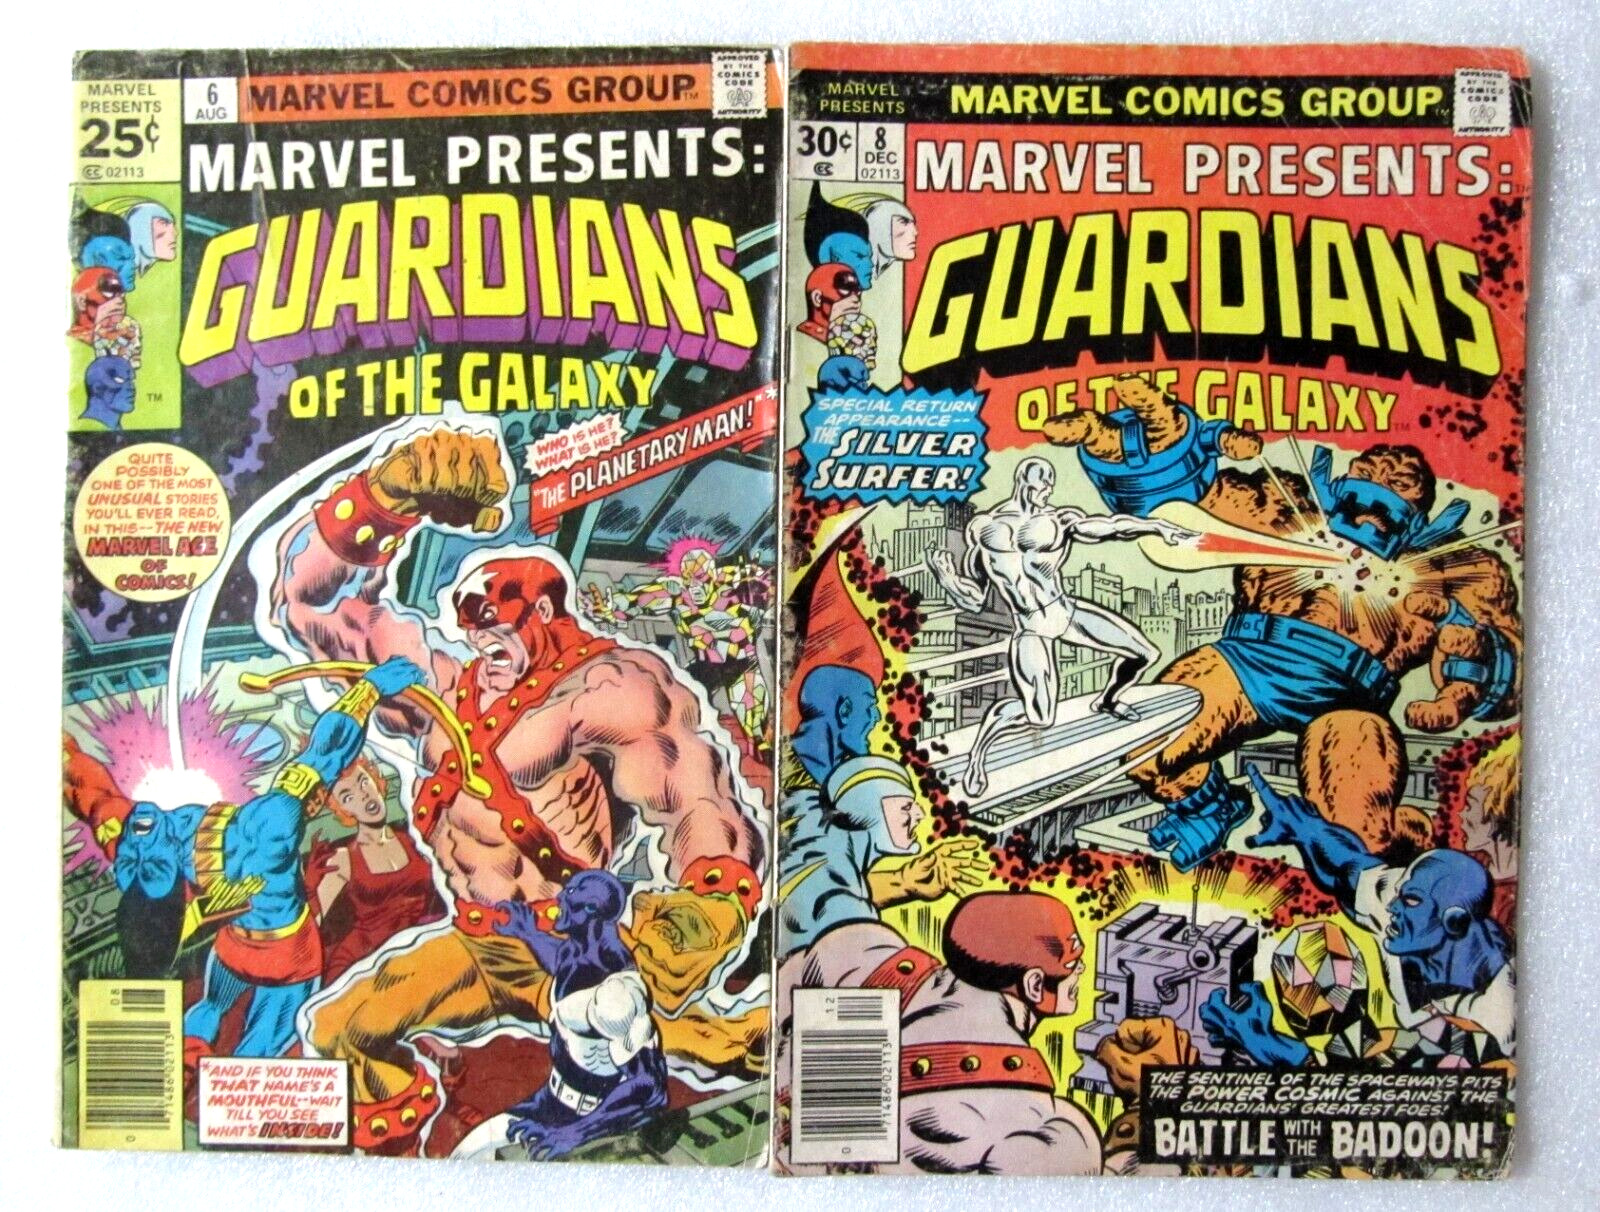 LOT MARVEL PRESENTS GUARDIANS of THE GALAXY #6 #8 BRONZE AGE COMIC SILVER SURFER